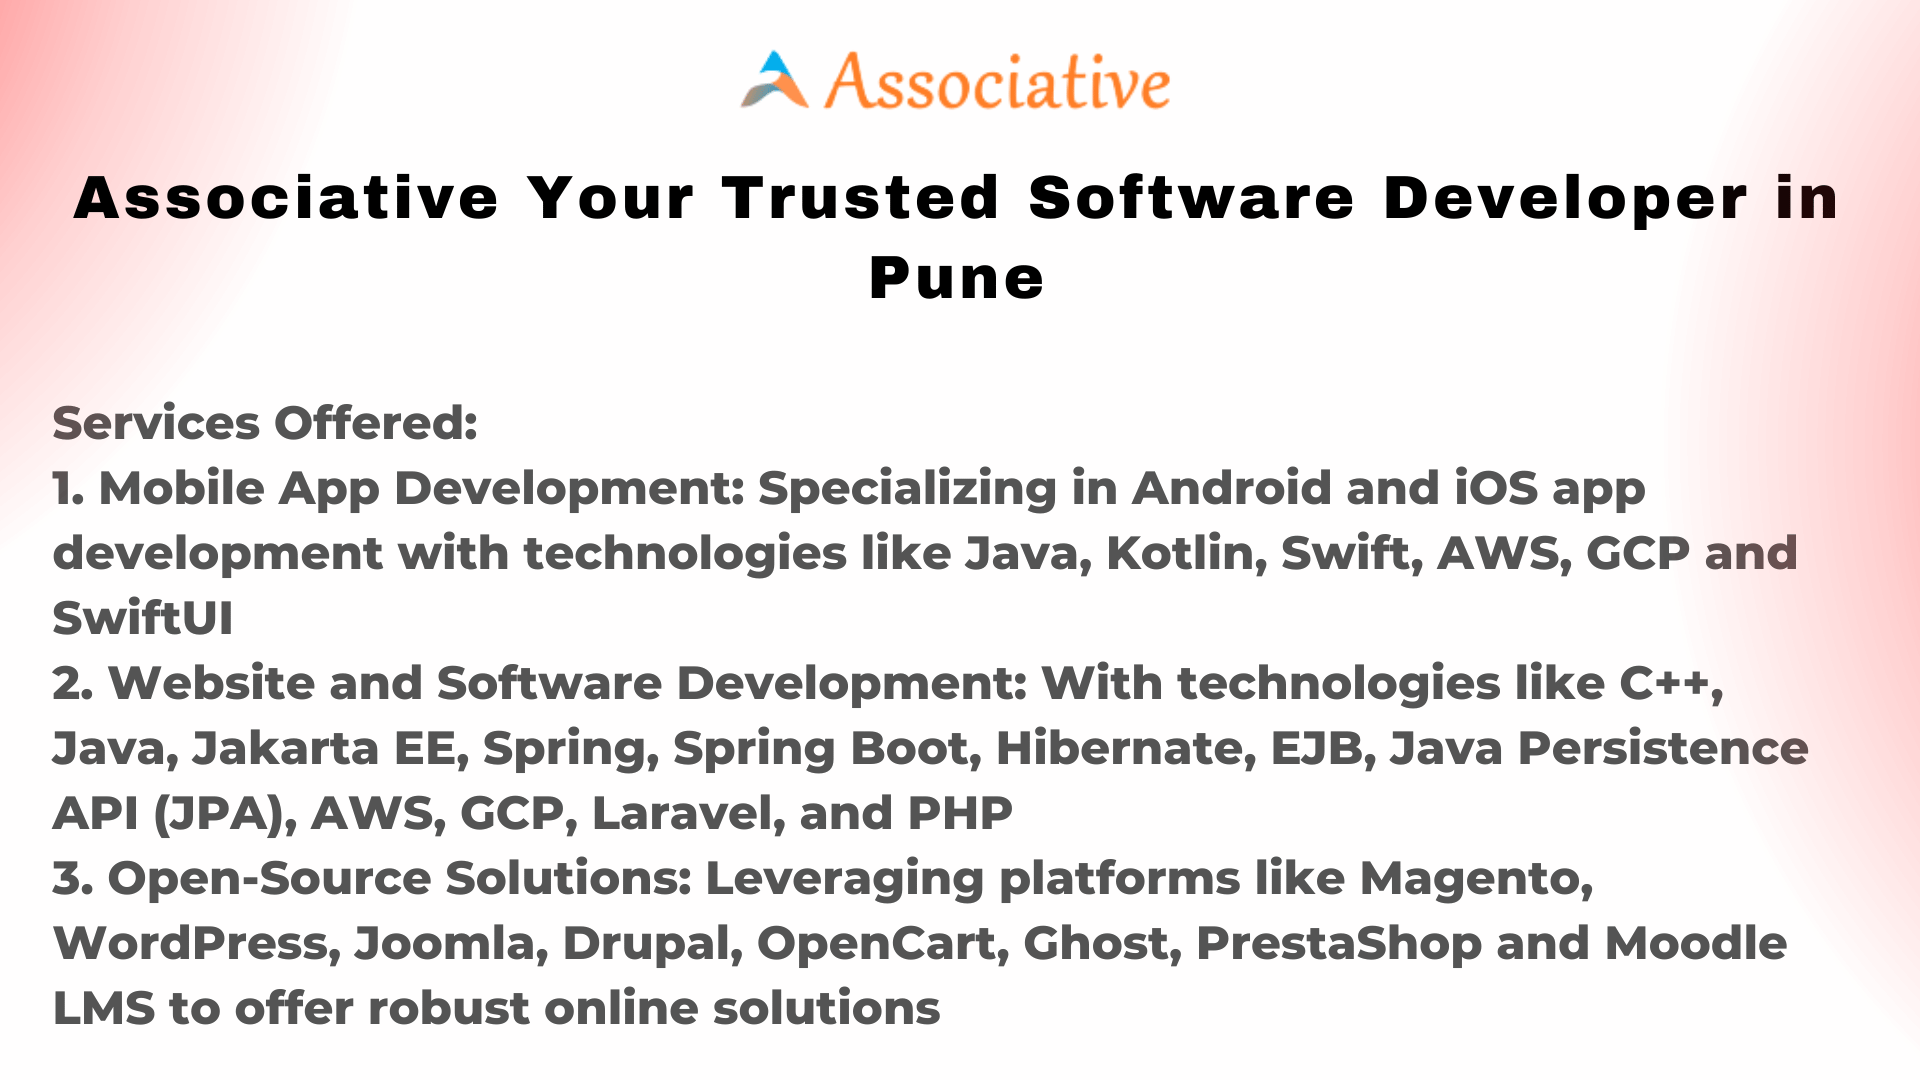 Associative Your Trusted Software Developer in Pune